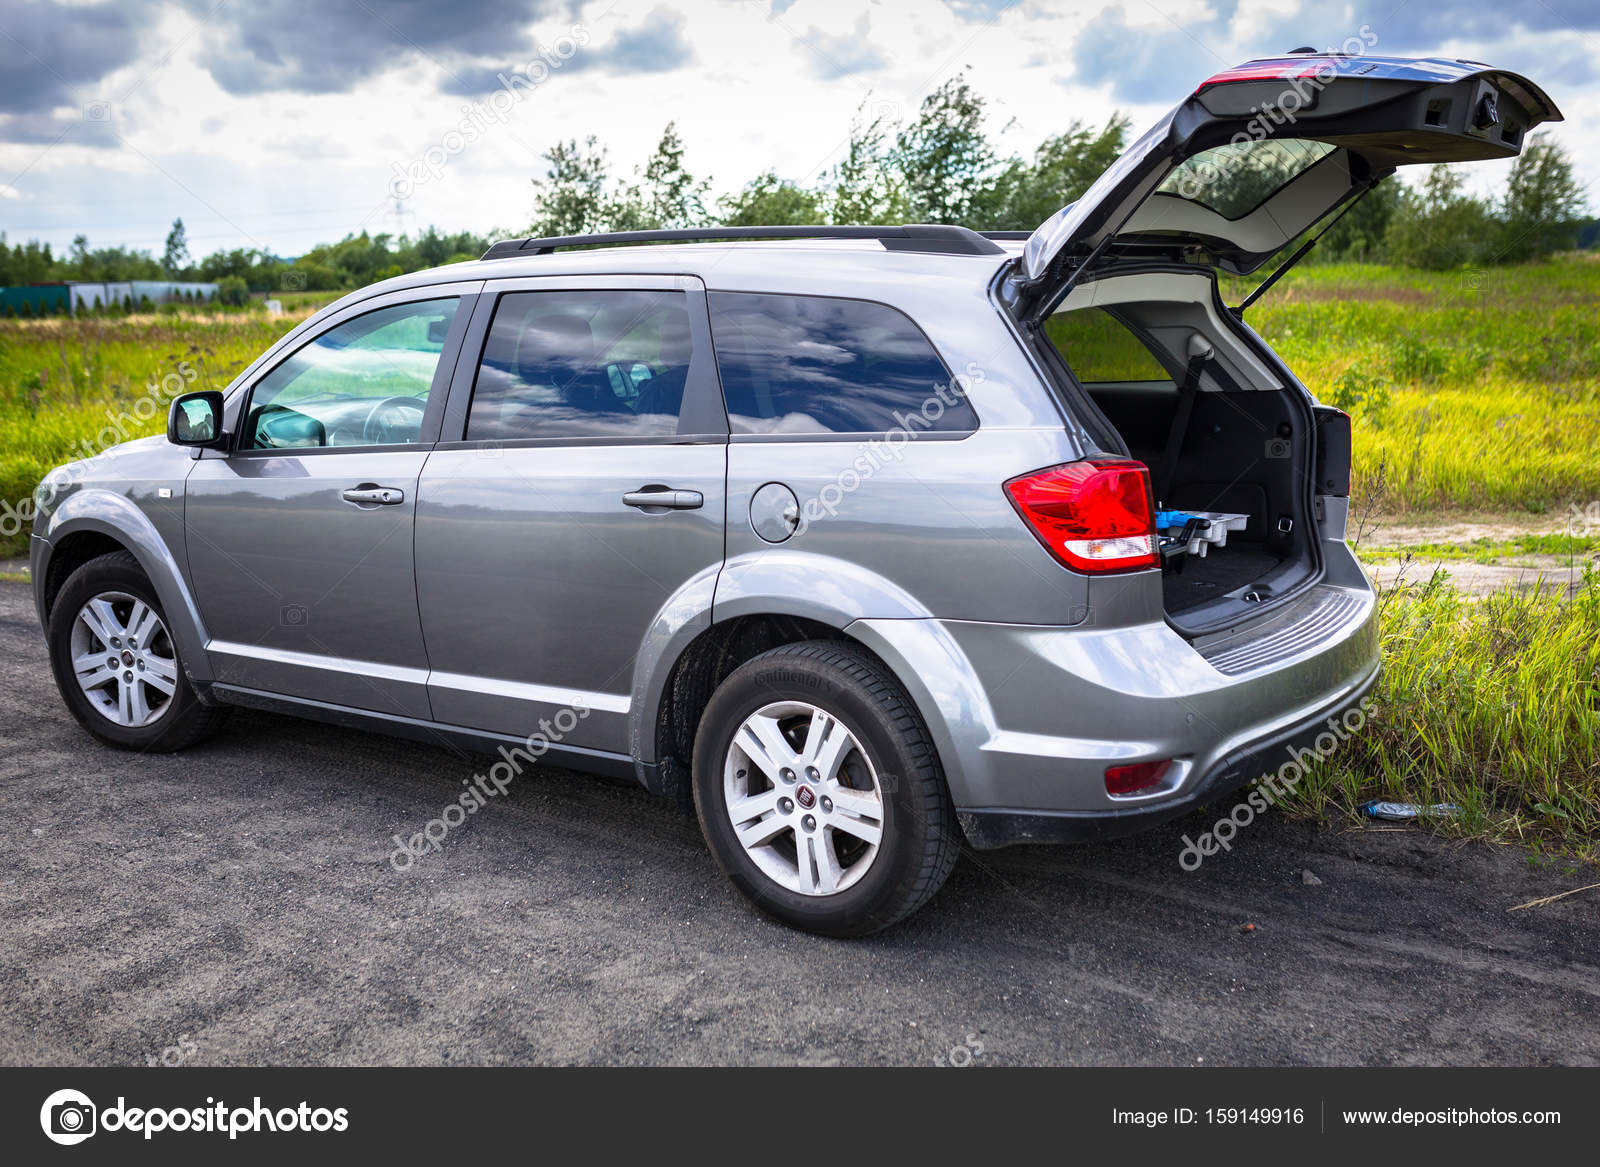 Fiat Freemont SUV on the offroad in Poland – Stock Editorial Photo ©  Patryk_Kosmider #159149916